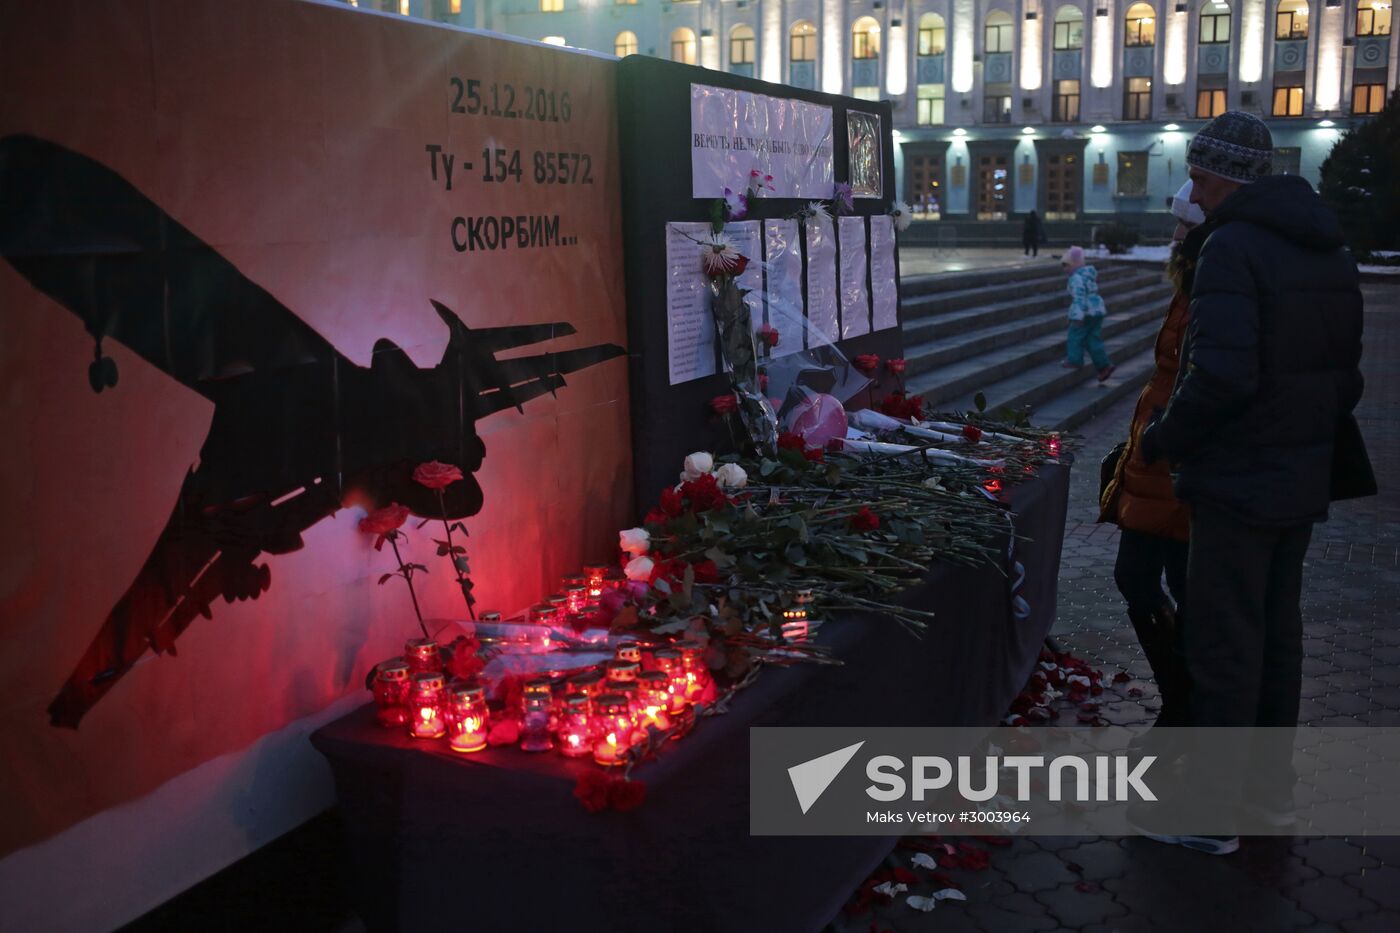 Day of Mourning for Tu-154 crash victims in Russia